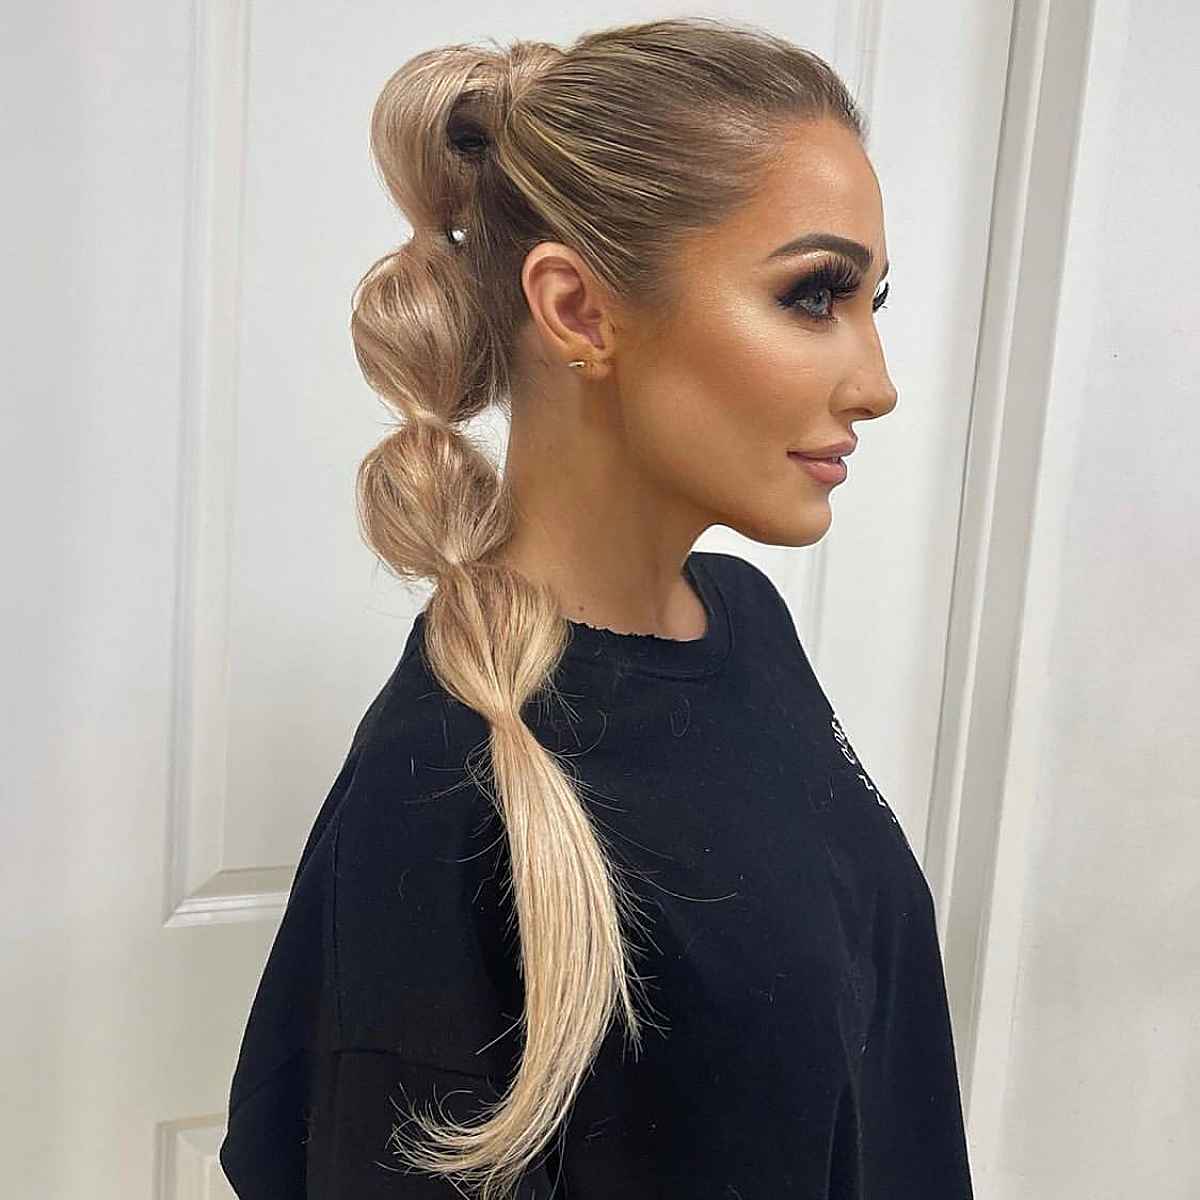 33 Cutest Prom Ponytail Hairstyles That Are Easy to Do!